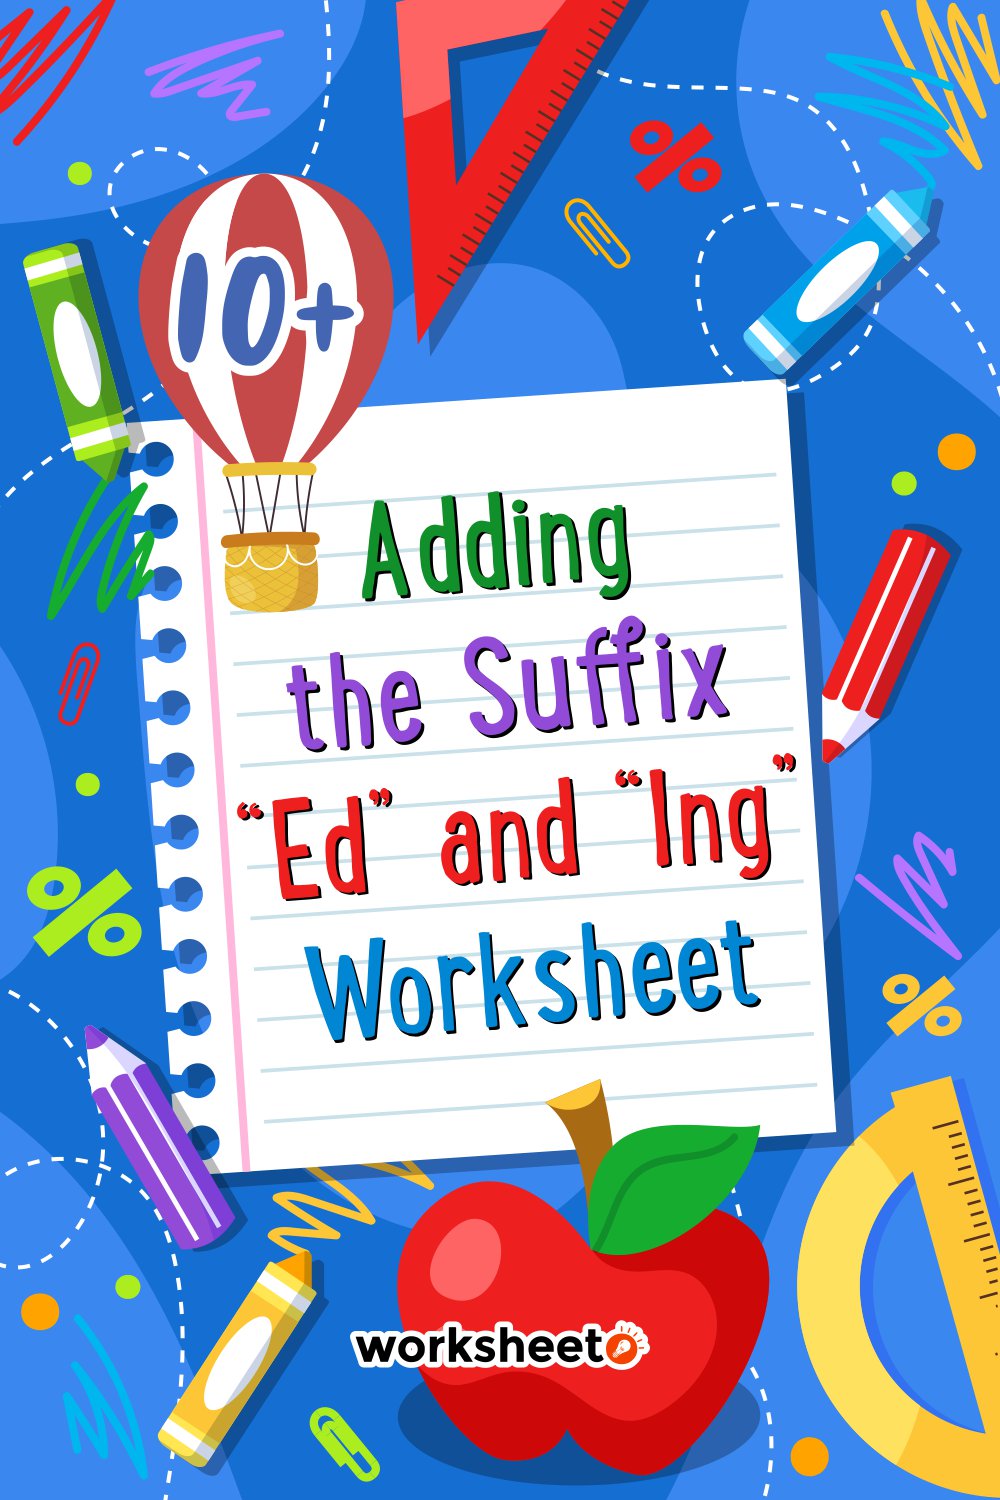 Adding the Suffix Ed and ING Worksheet